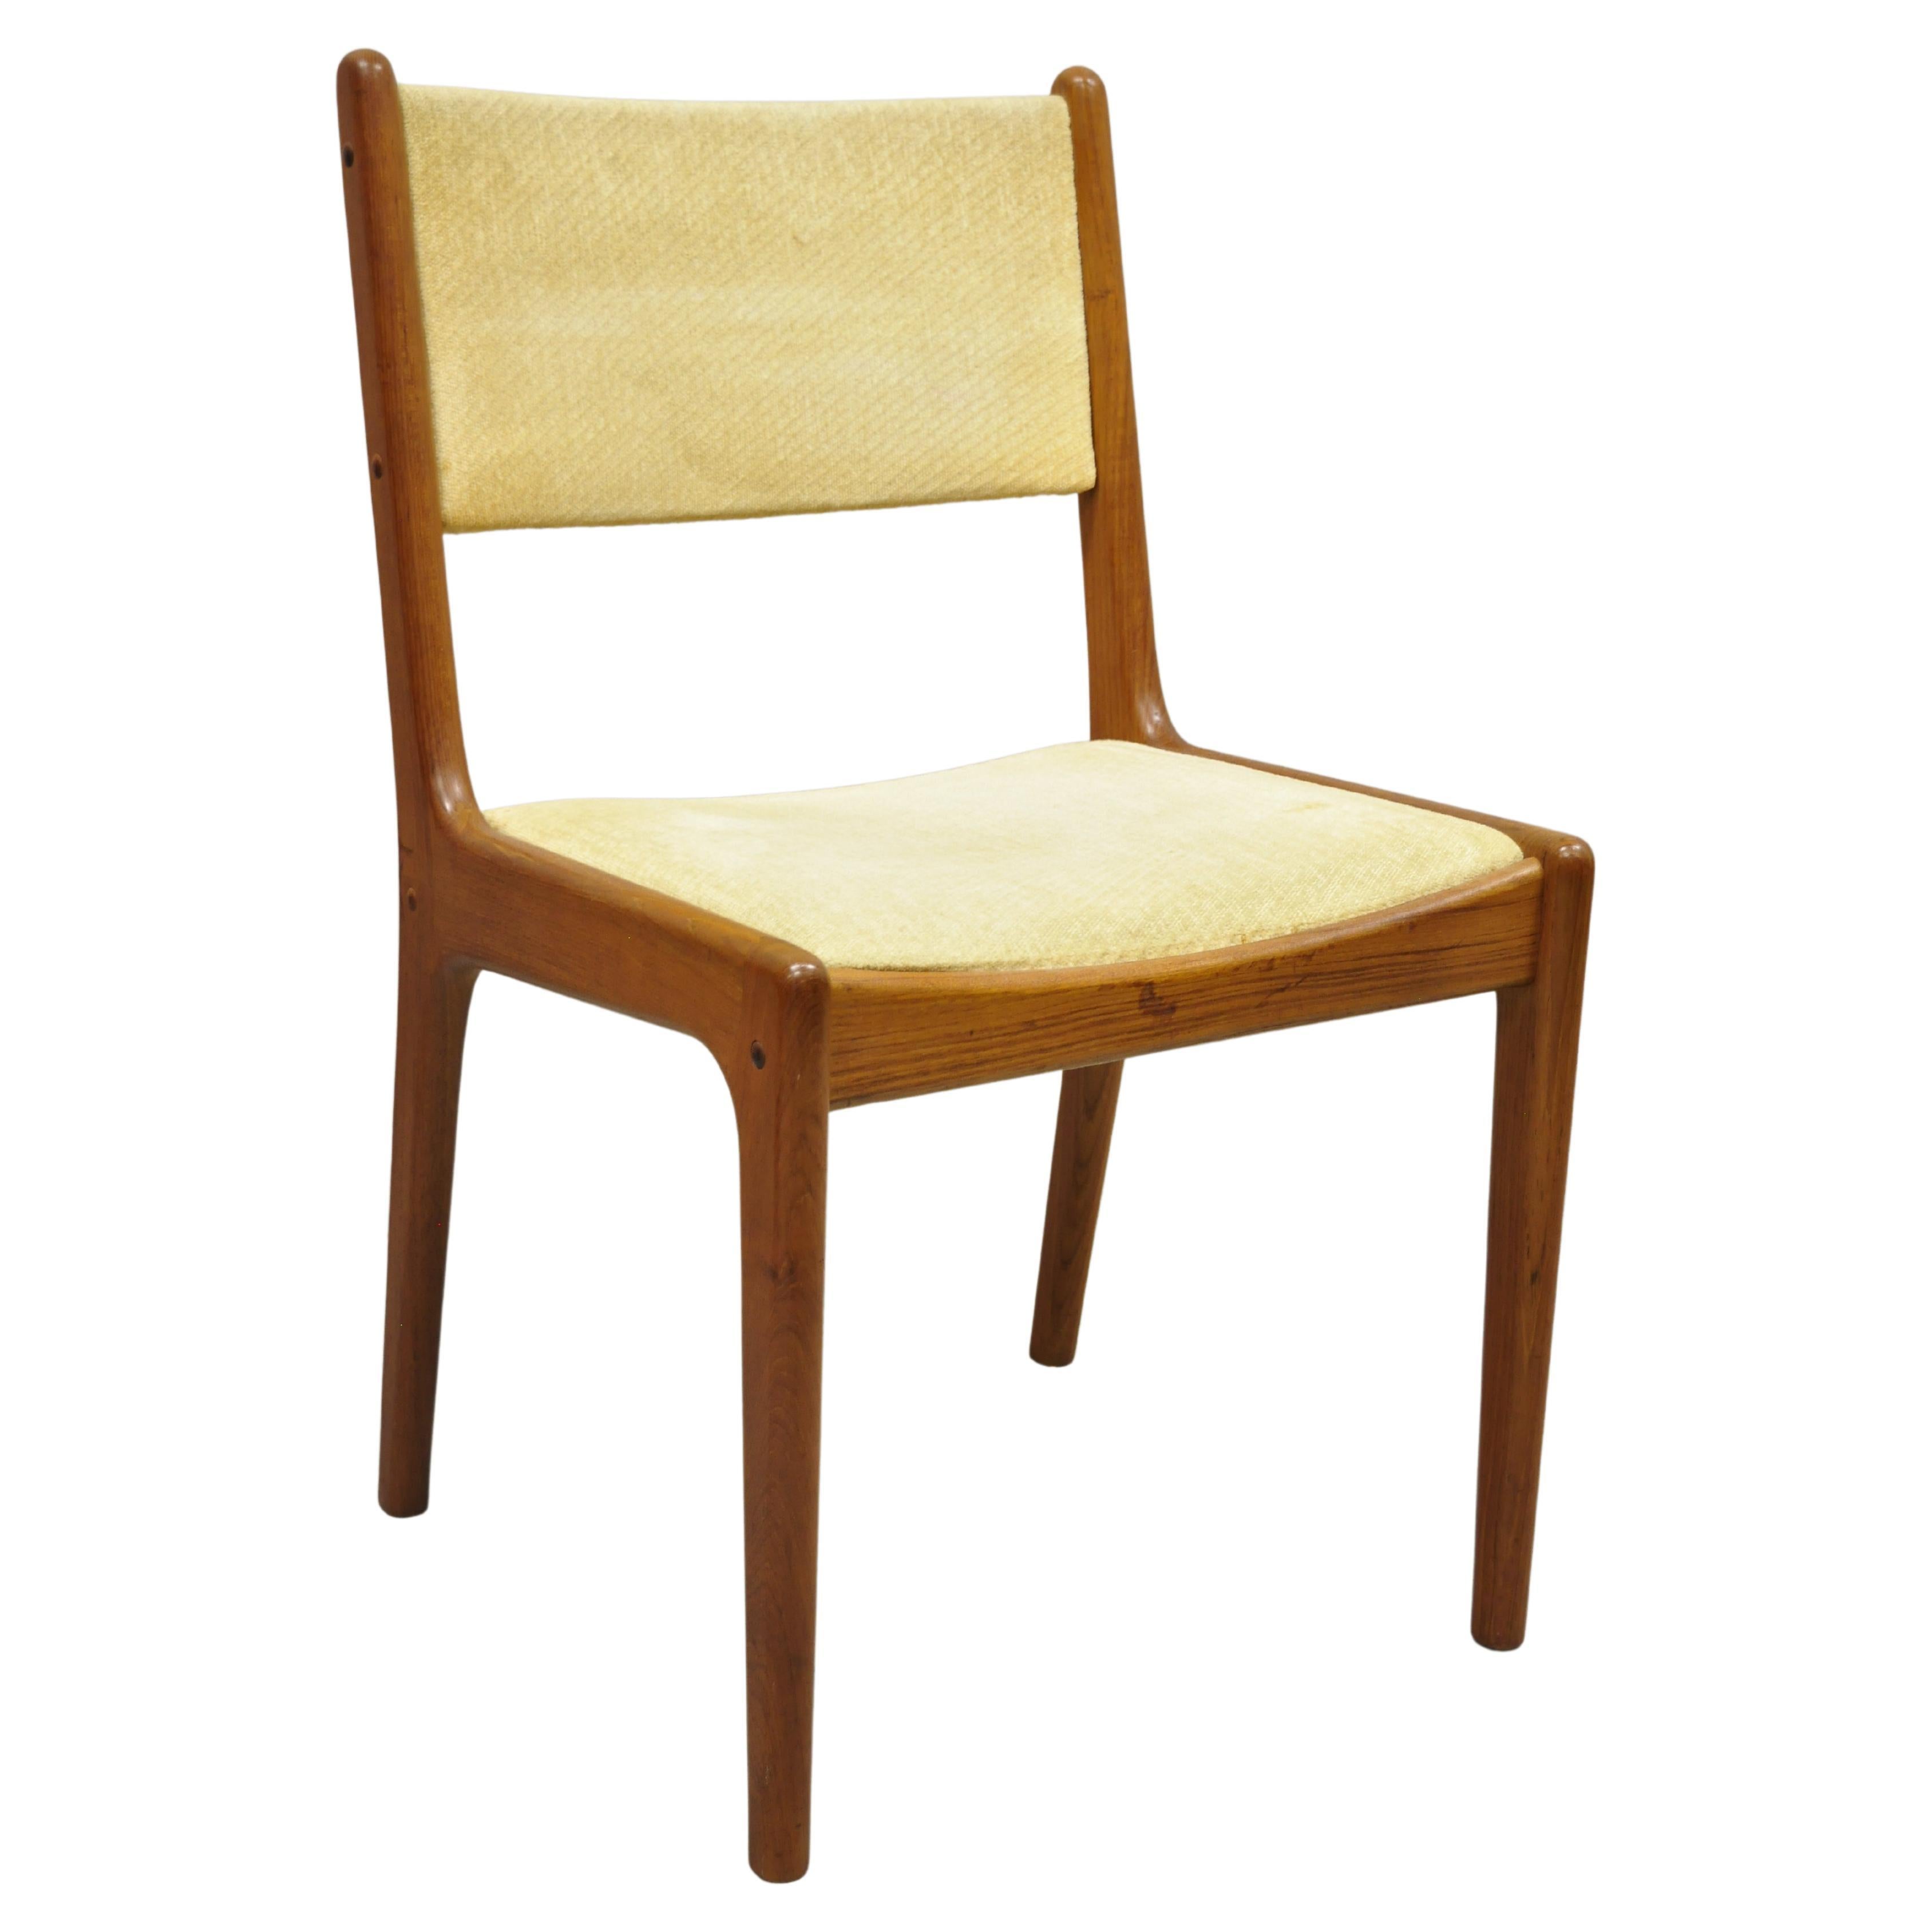 Vintage Mid-Century Modern Danish Style Teak Wood Dining Chair by Sun Furniture For Sale